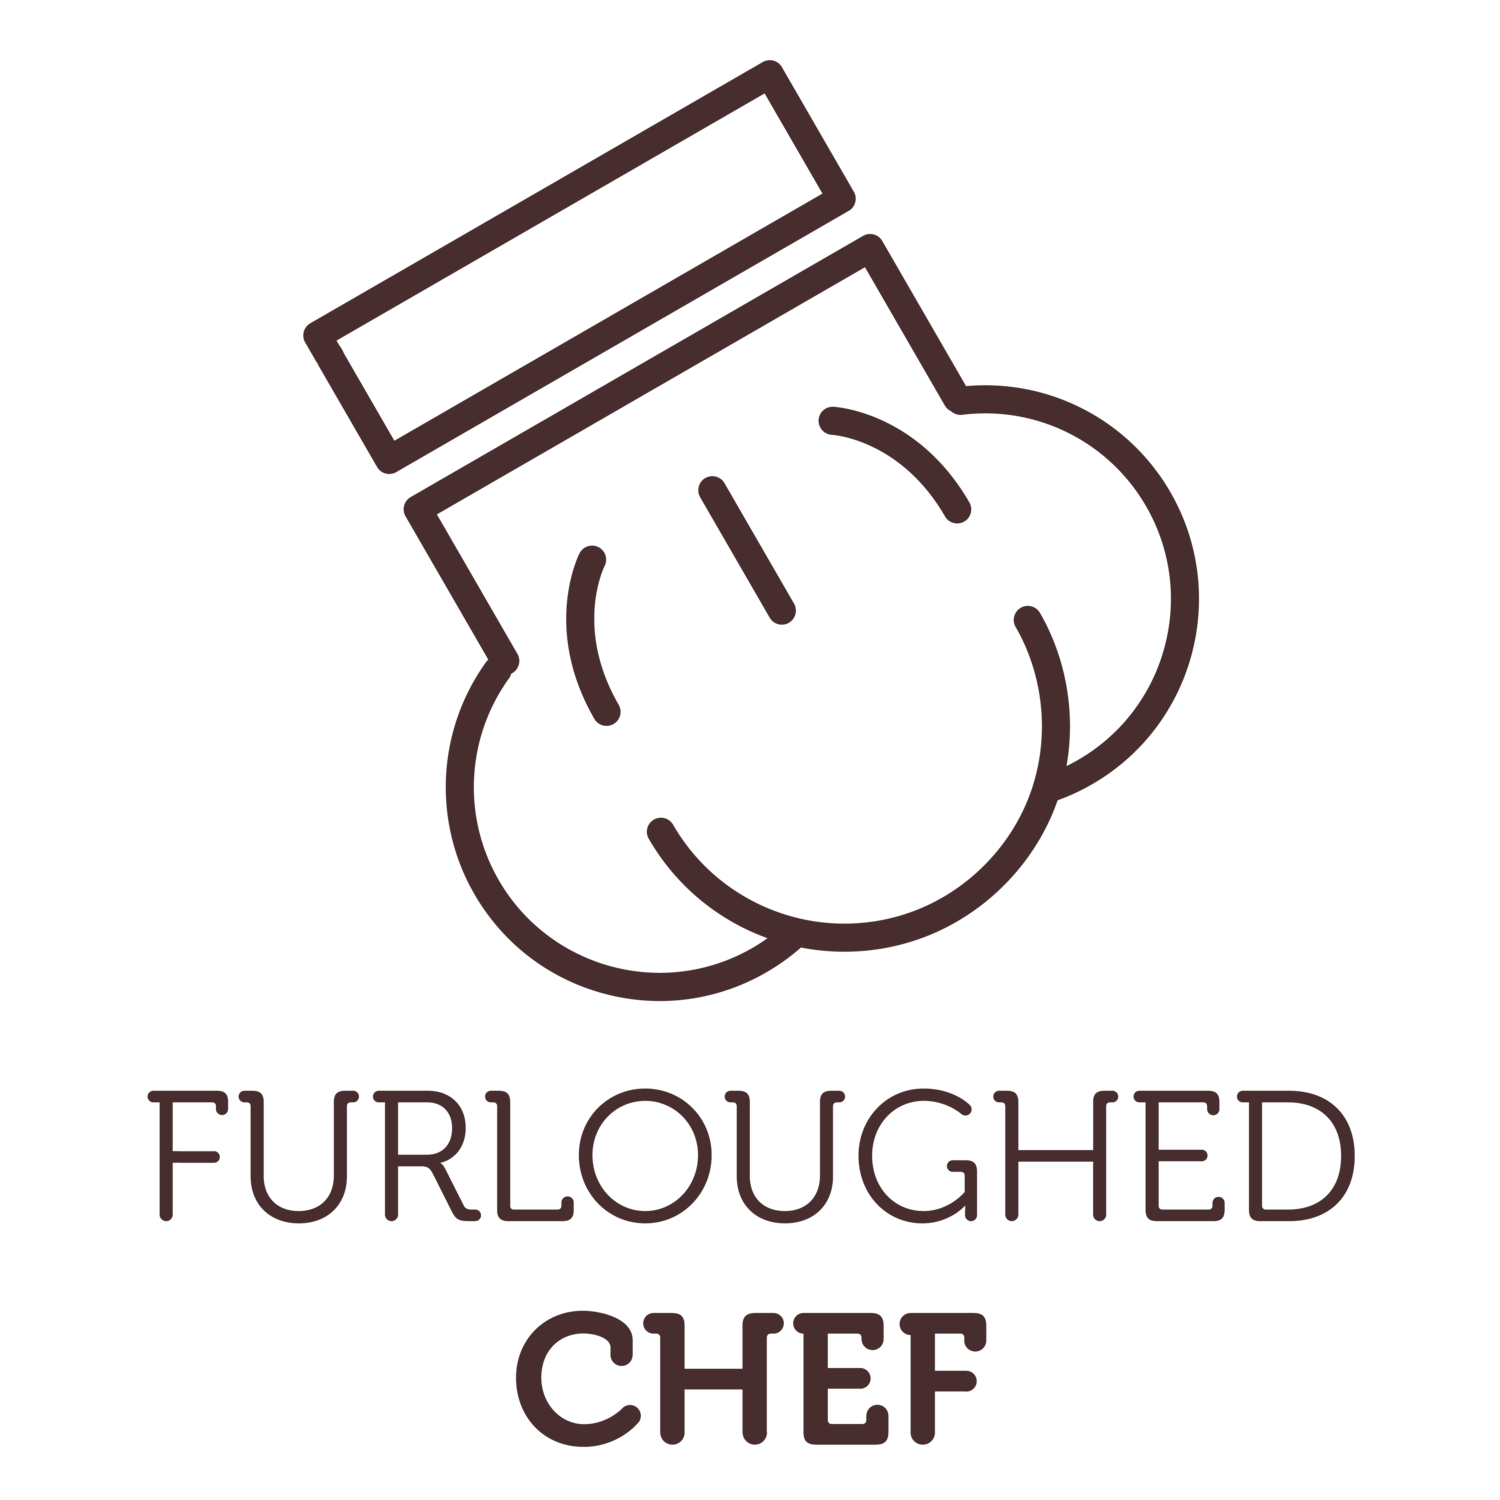 The Furloughed Chef